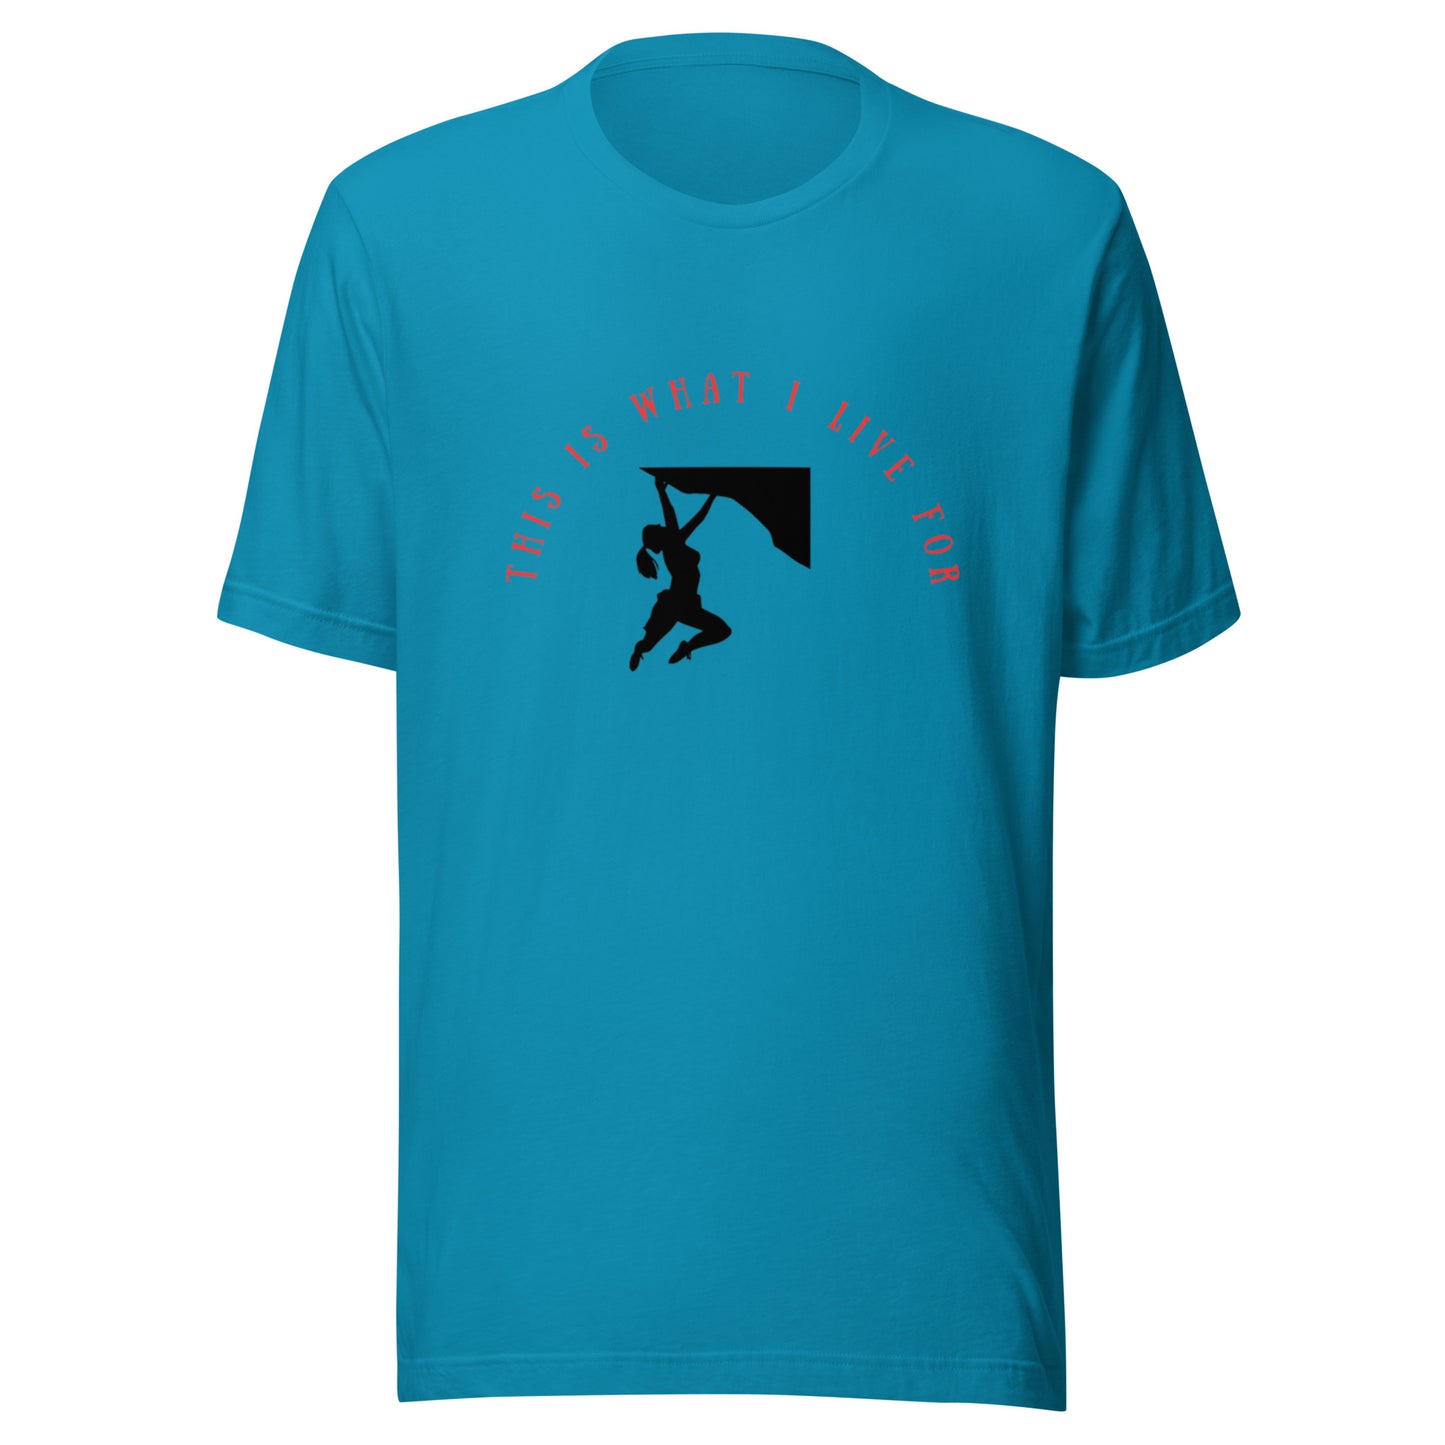 This is what I live for Unisex t-shirt (female free climb)